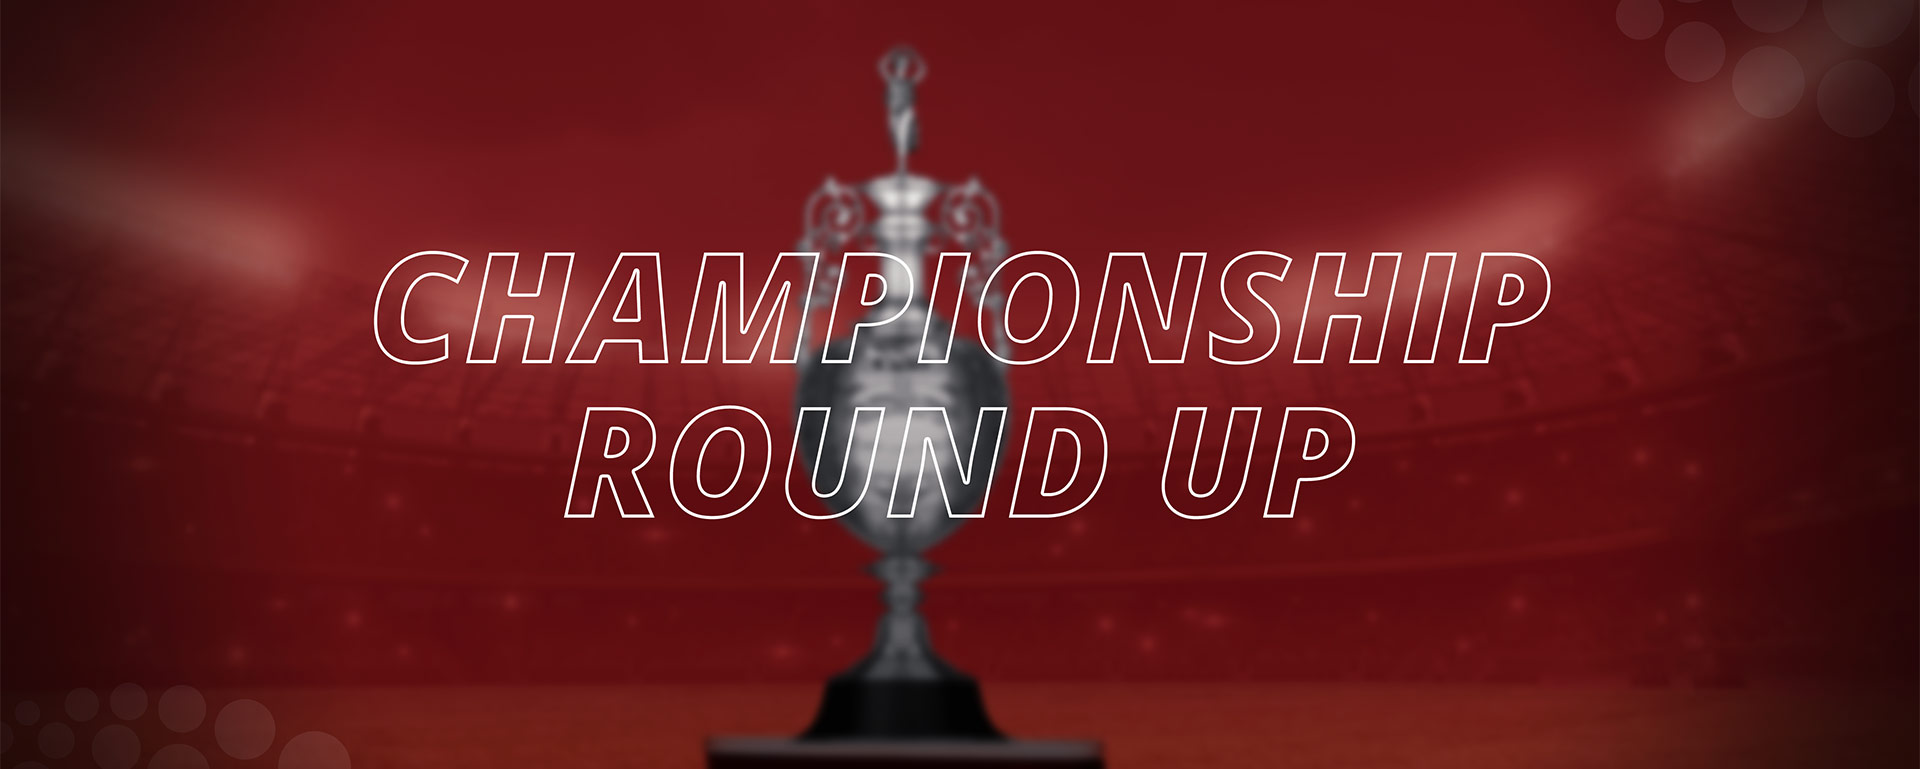 CHAMPIONSHIP ROUND UP – WHO IS GOING UP?